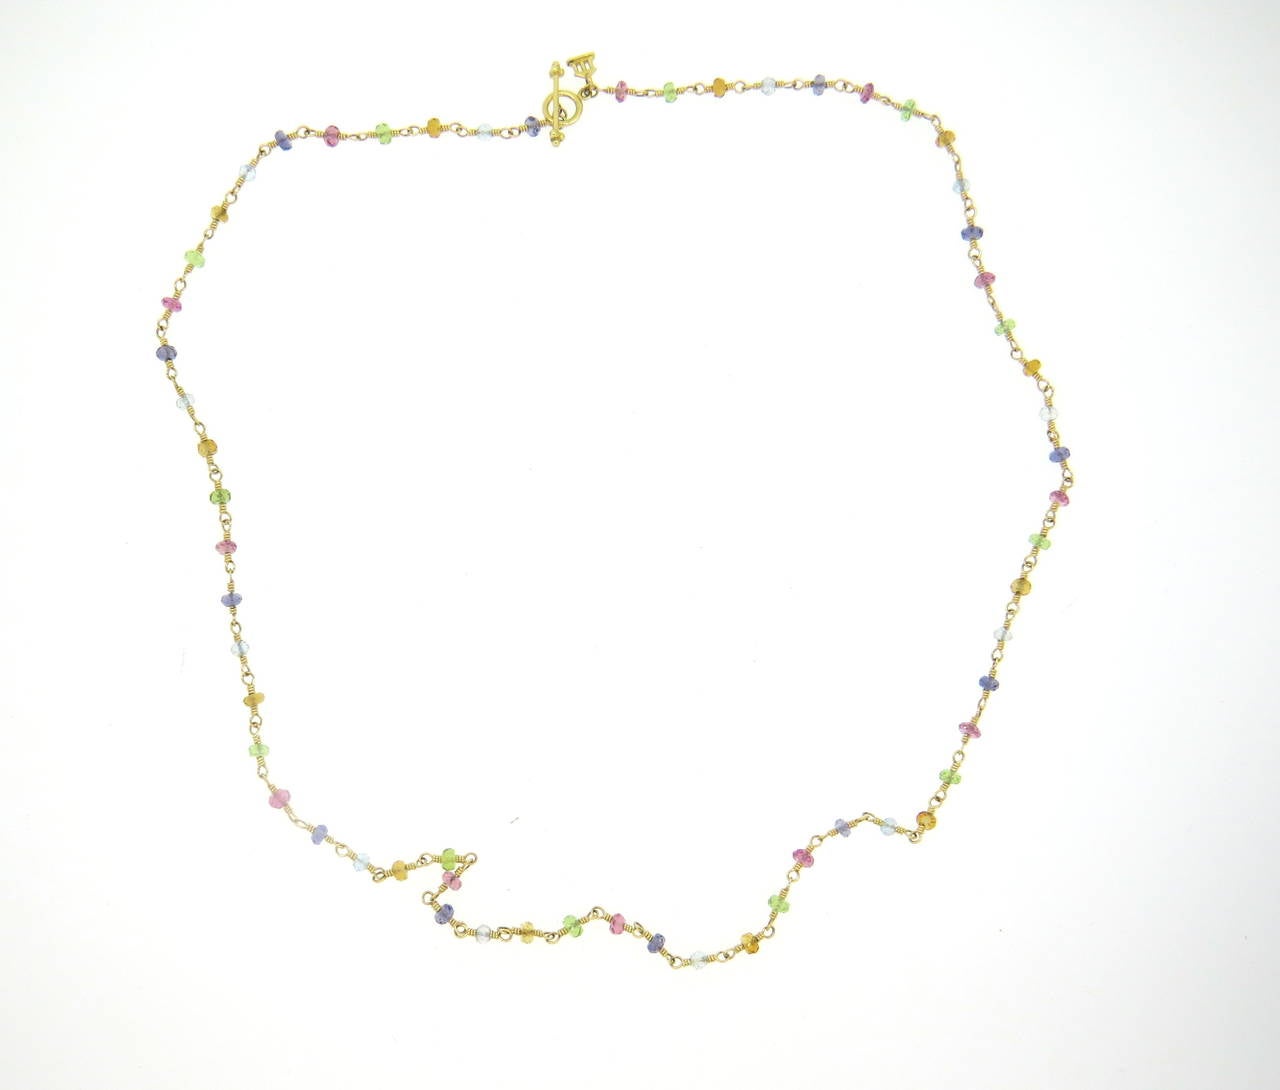 New 18k yellow gold necklace, crafted by Temple St. Clair with multicolor sapphire beads, measuring 4mm in diameter. Necklace is 24